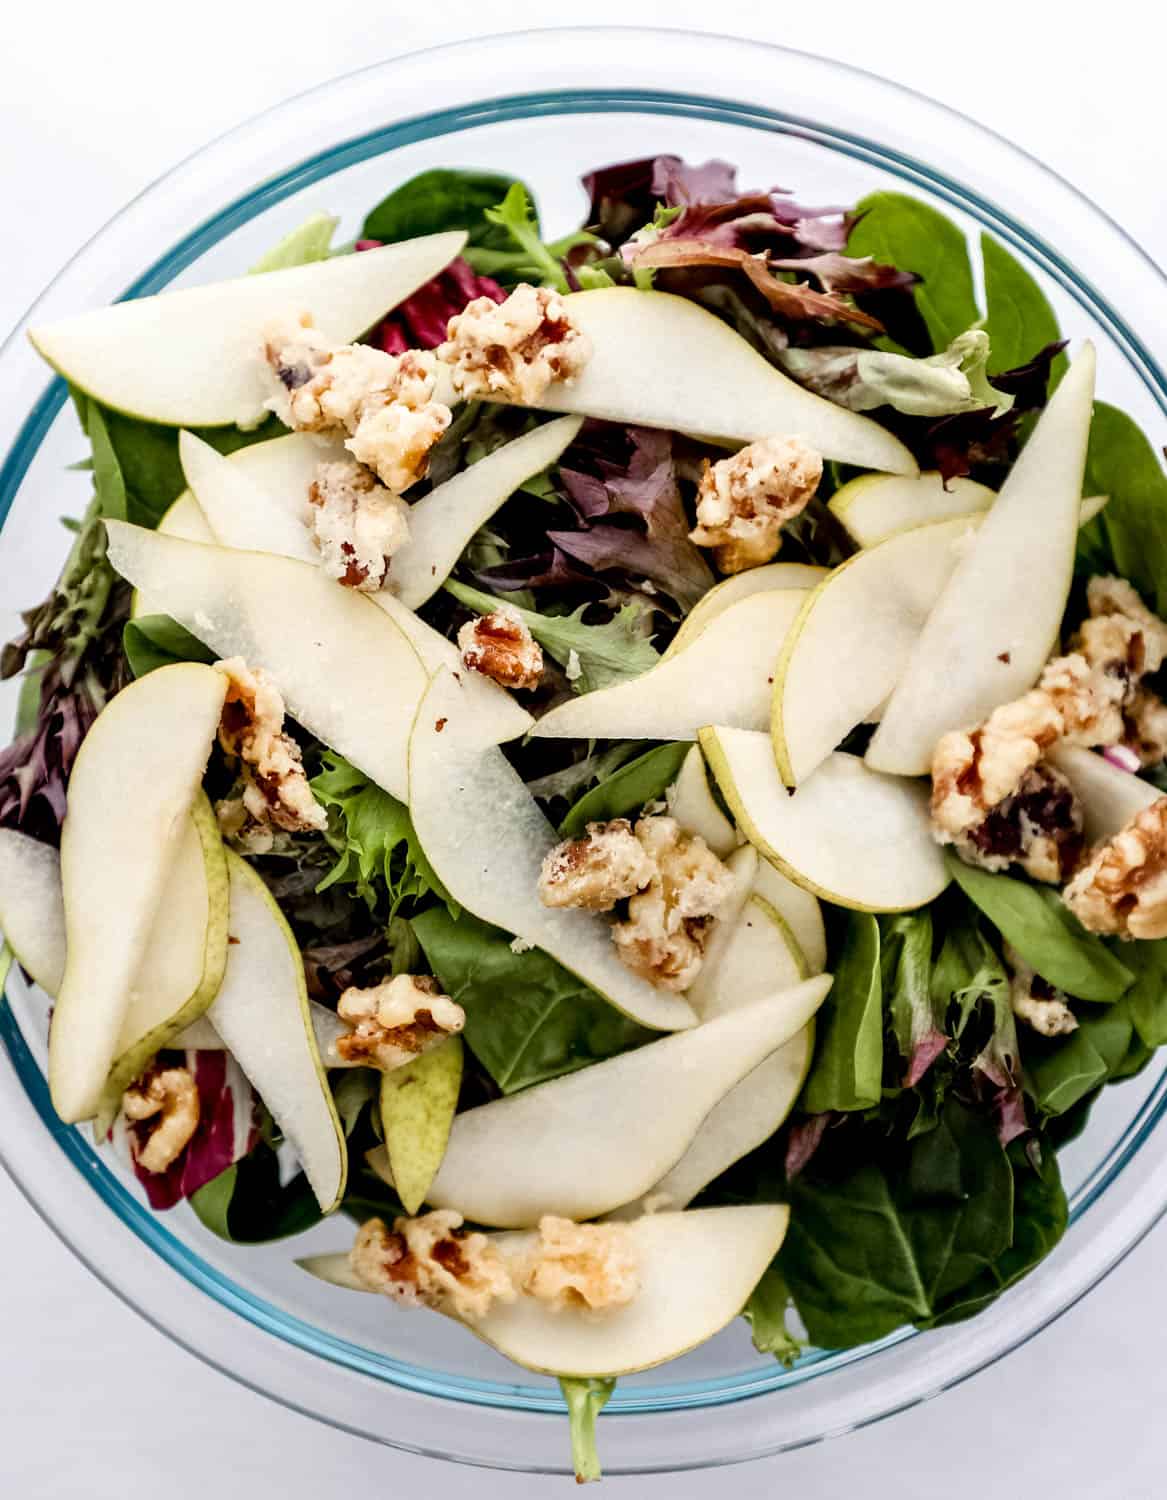 Large glass mixing bowl with salad greens, pear slices, and candied walnuts in it. 